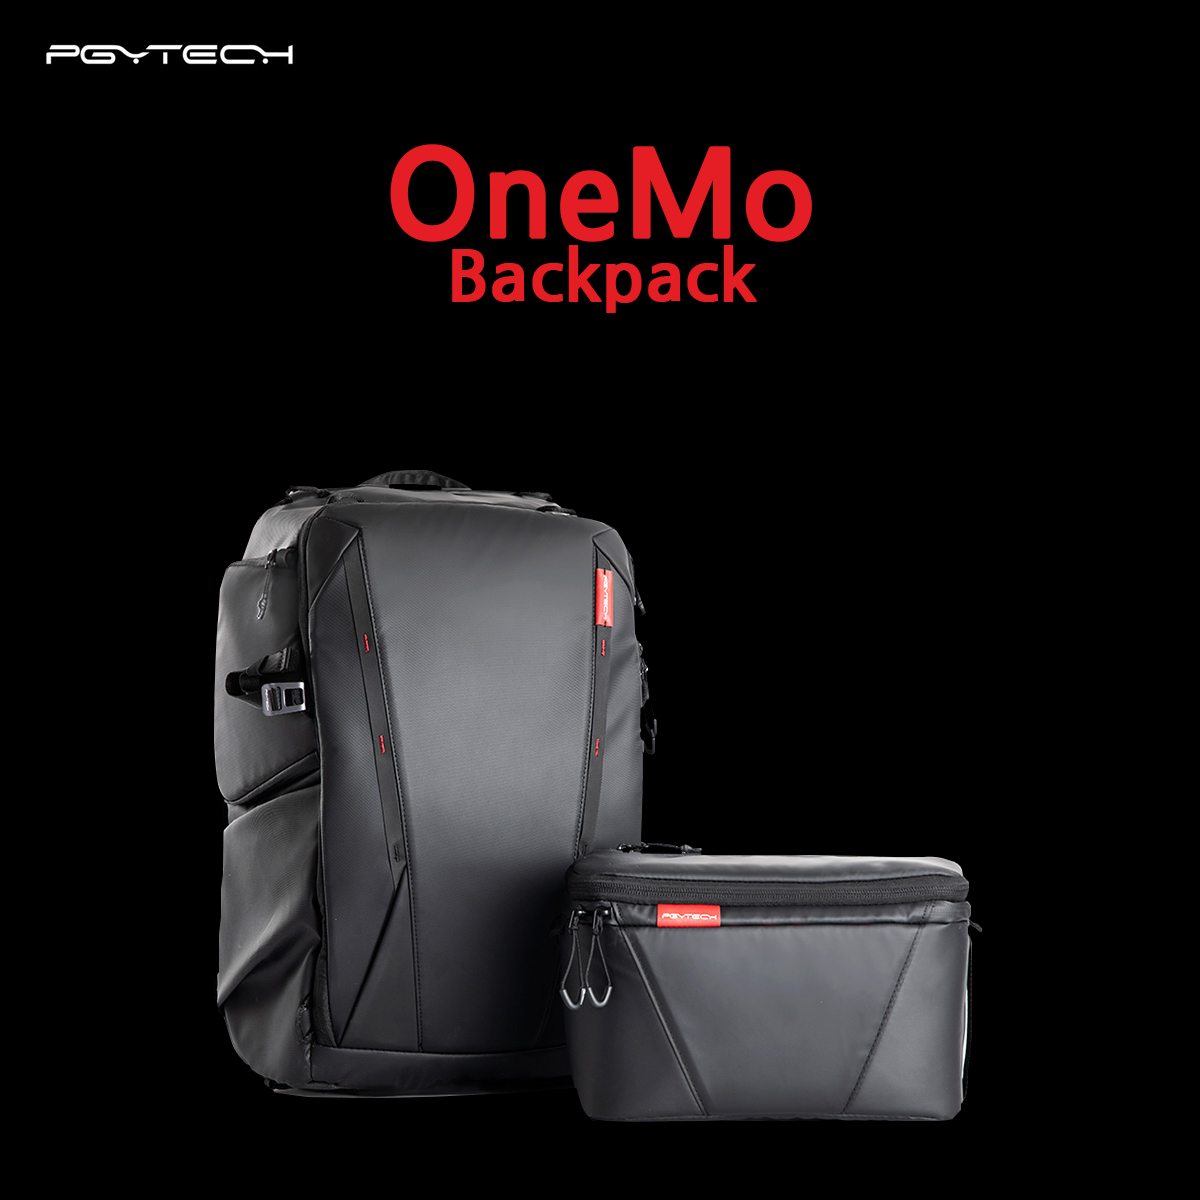 OneMo Backpack